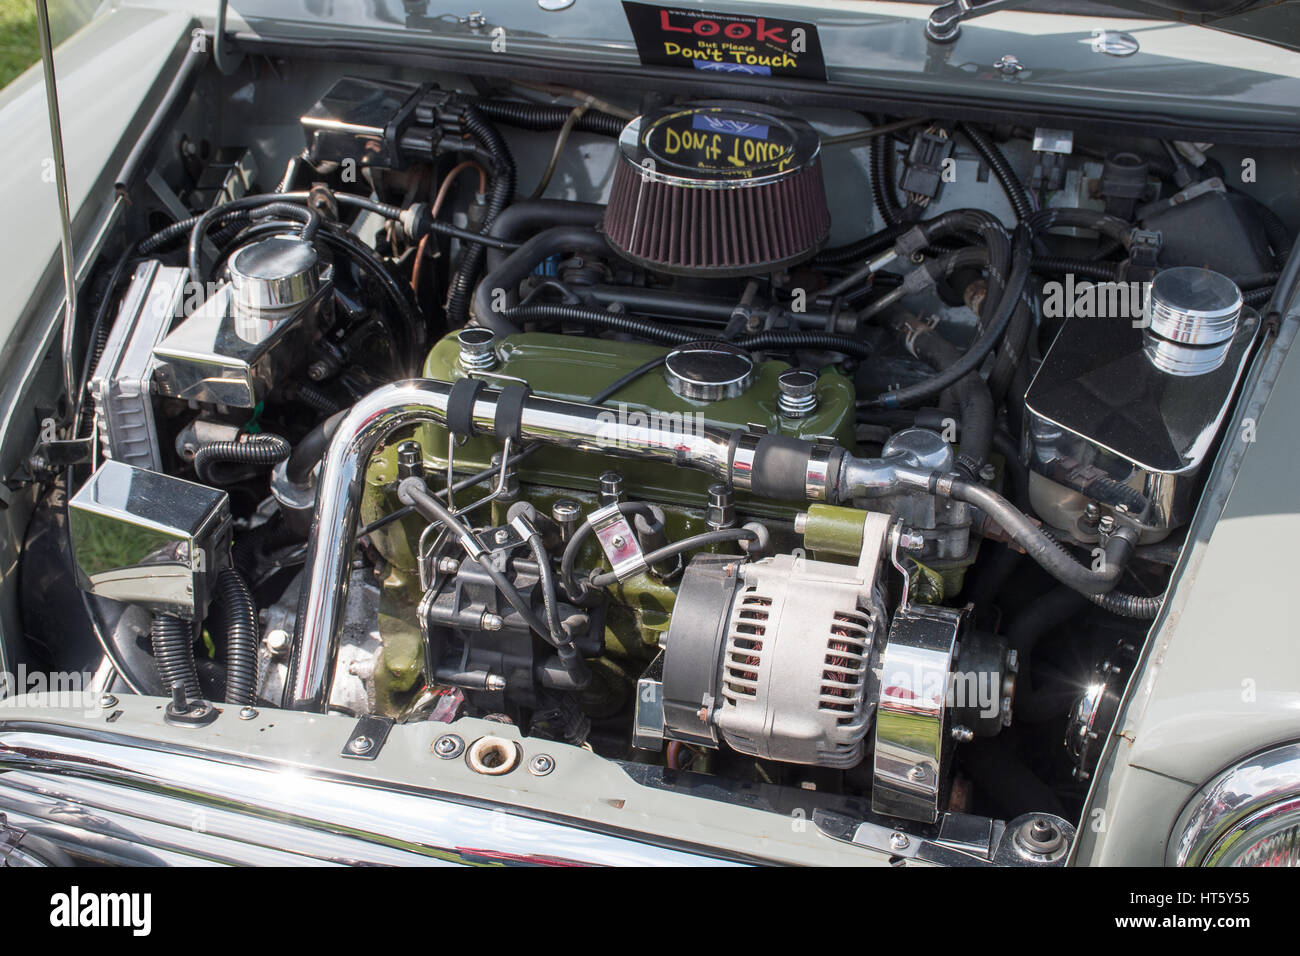 MANCHESTER, UNITED KINGDOM - JULY 11, 2015: A 1995 Rover Mini Cooper classic car engine. July 2015. Stock Photo